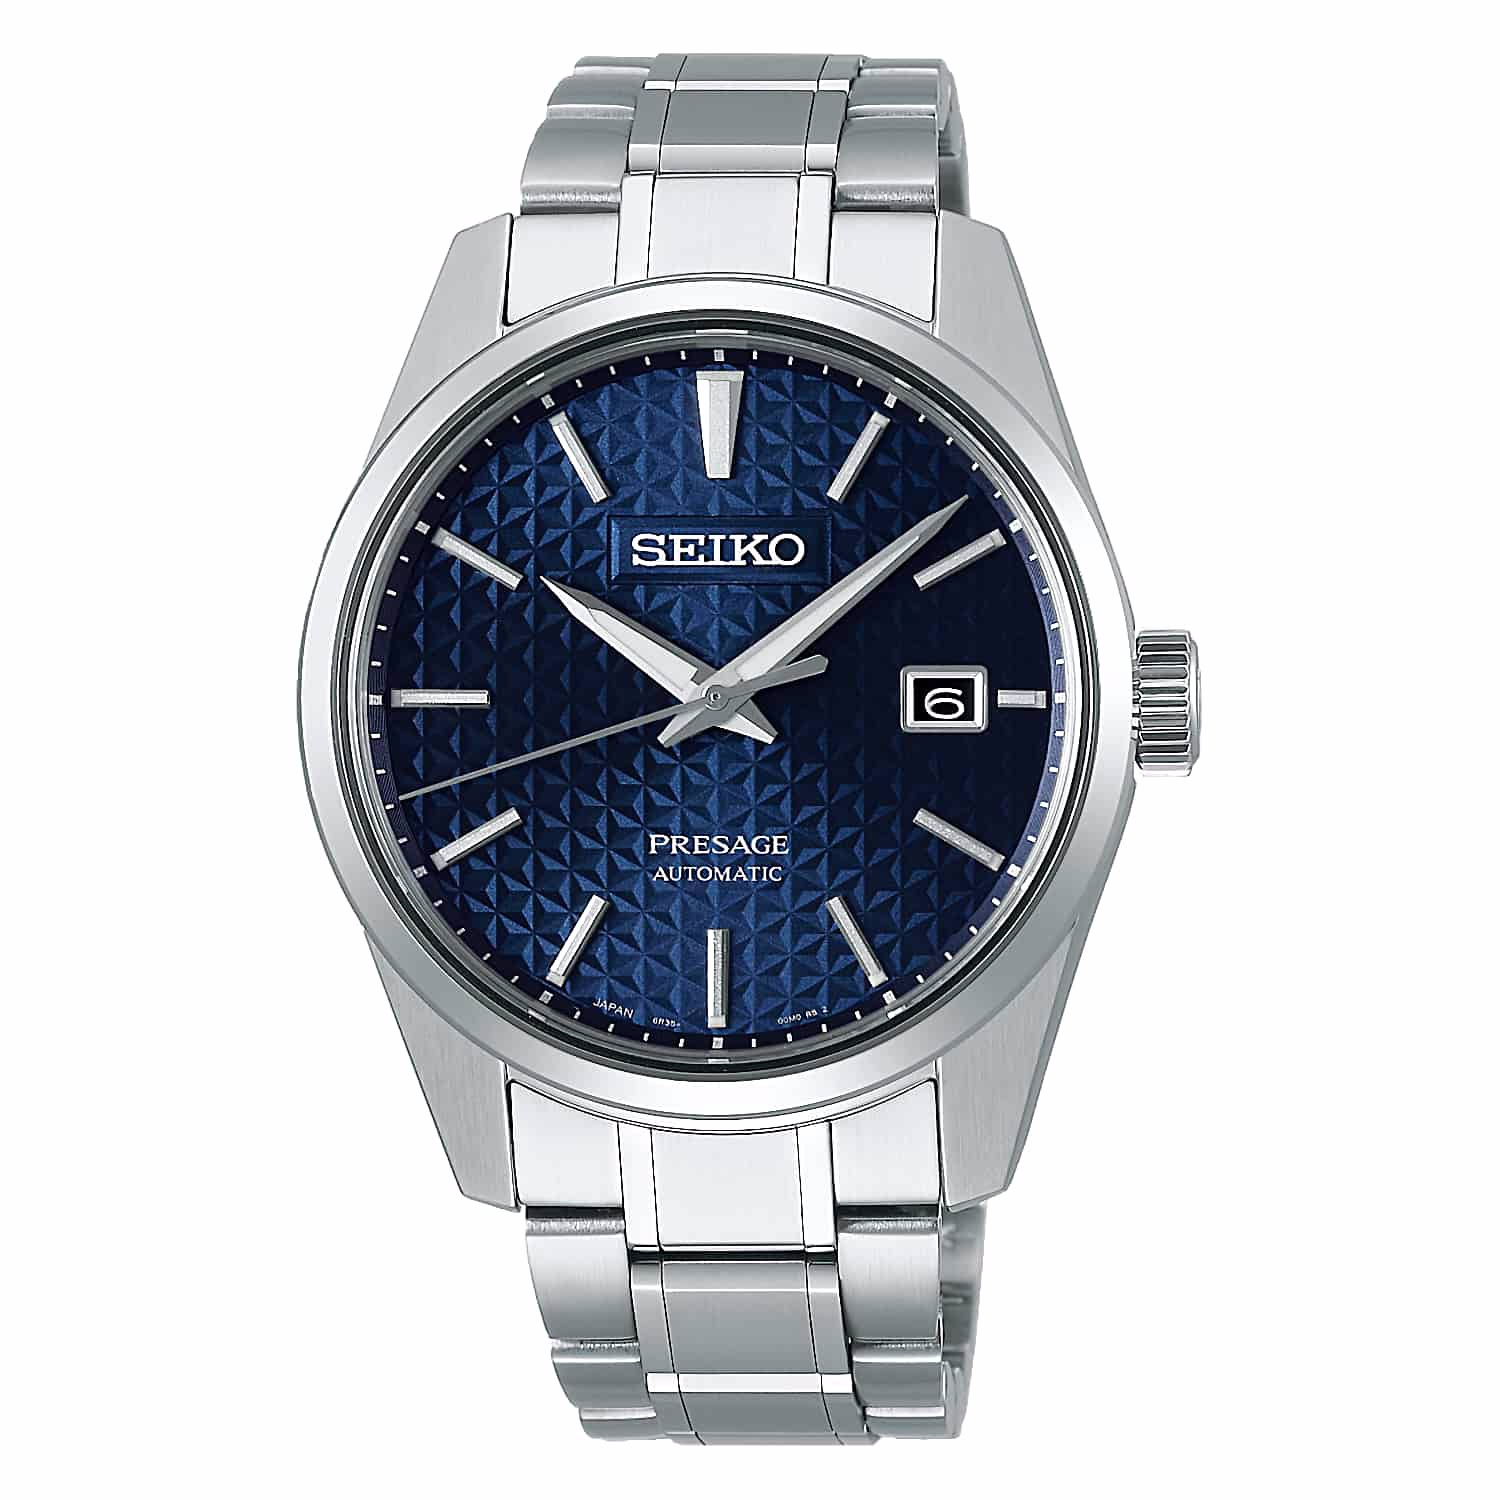 SPB167J1 SEIKO Presage Sharp Edged Series Watch. Since time immemorial, a central aspect of the Japanese sense of beauty has been simplicity.  To create objects or images of refinement and grace with few elements and no extraneous decoration has long been